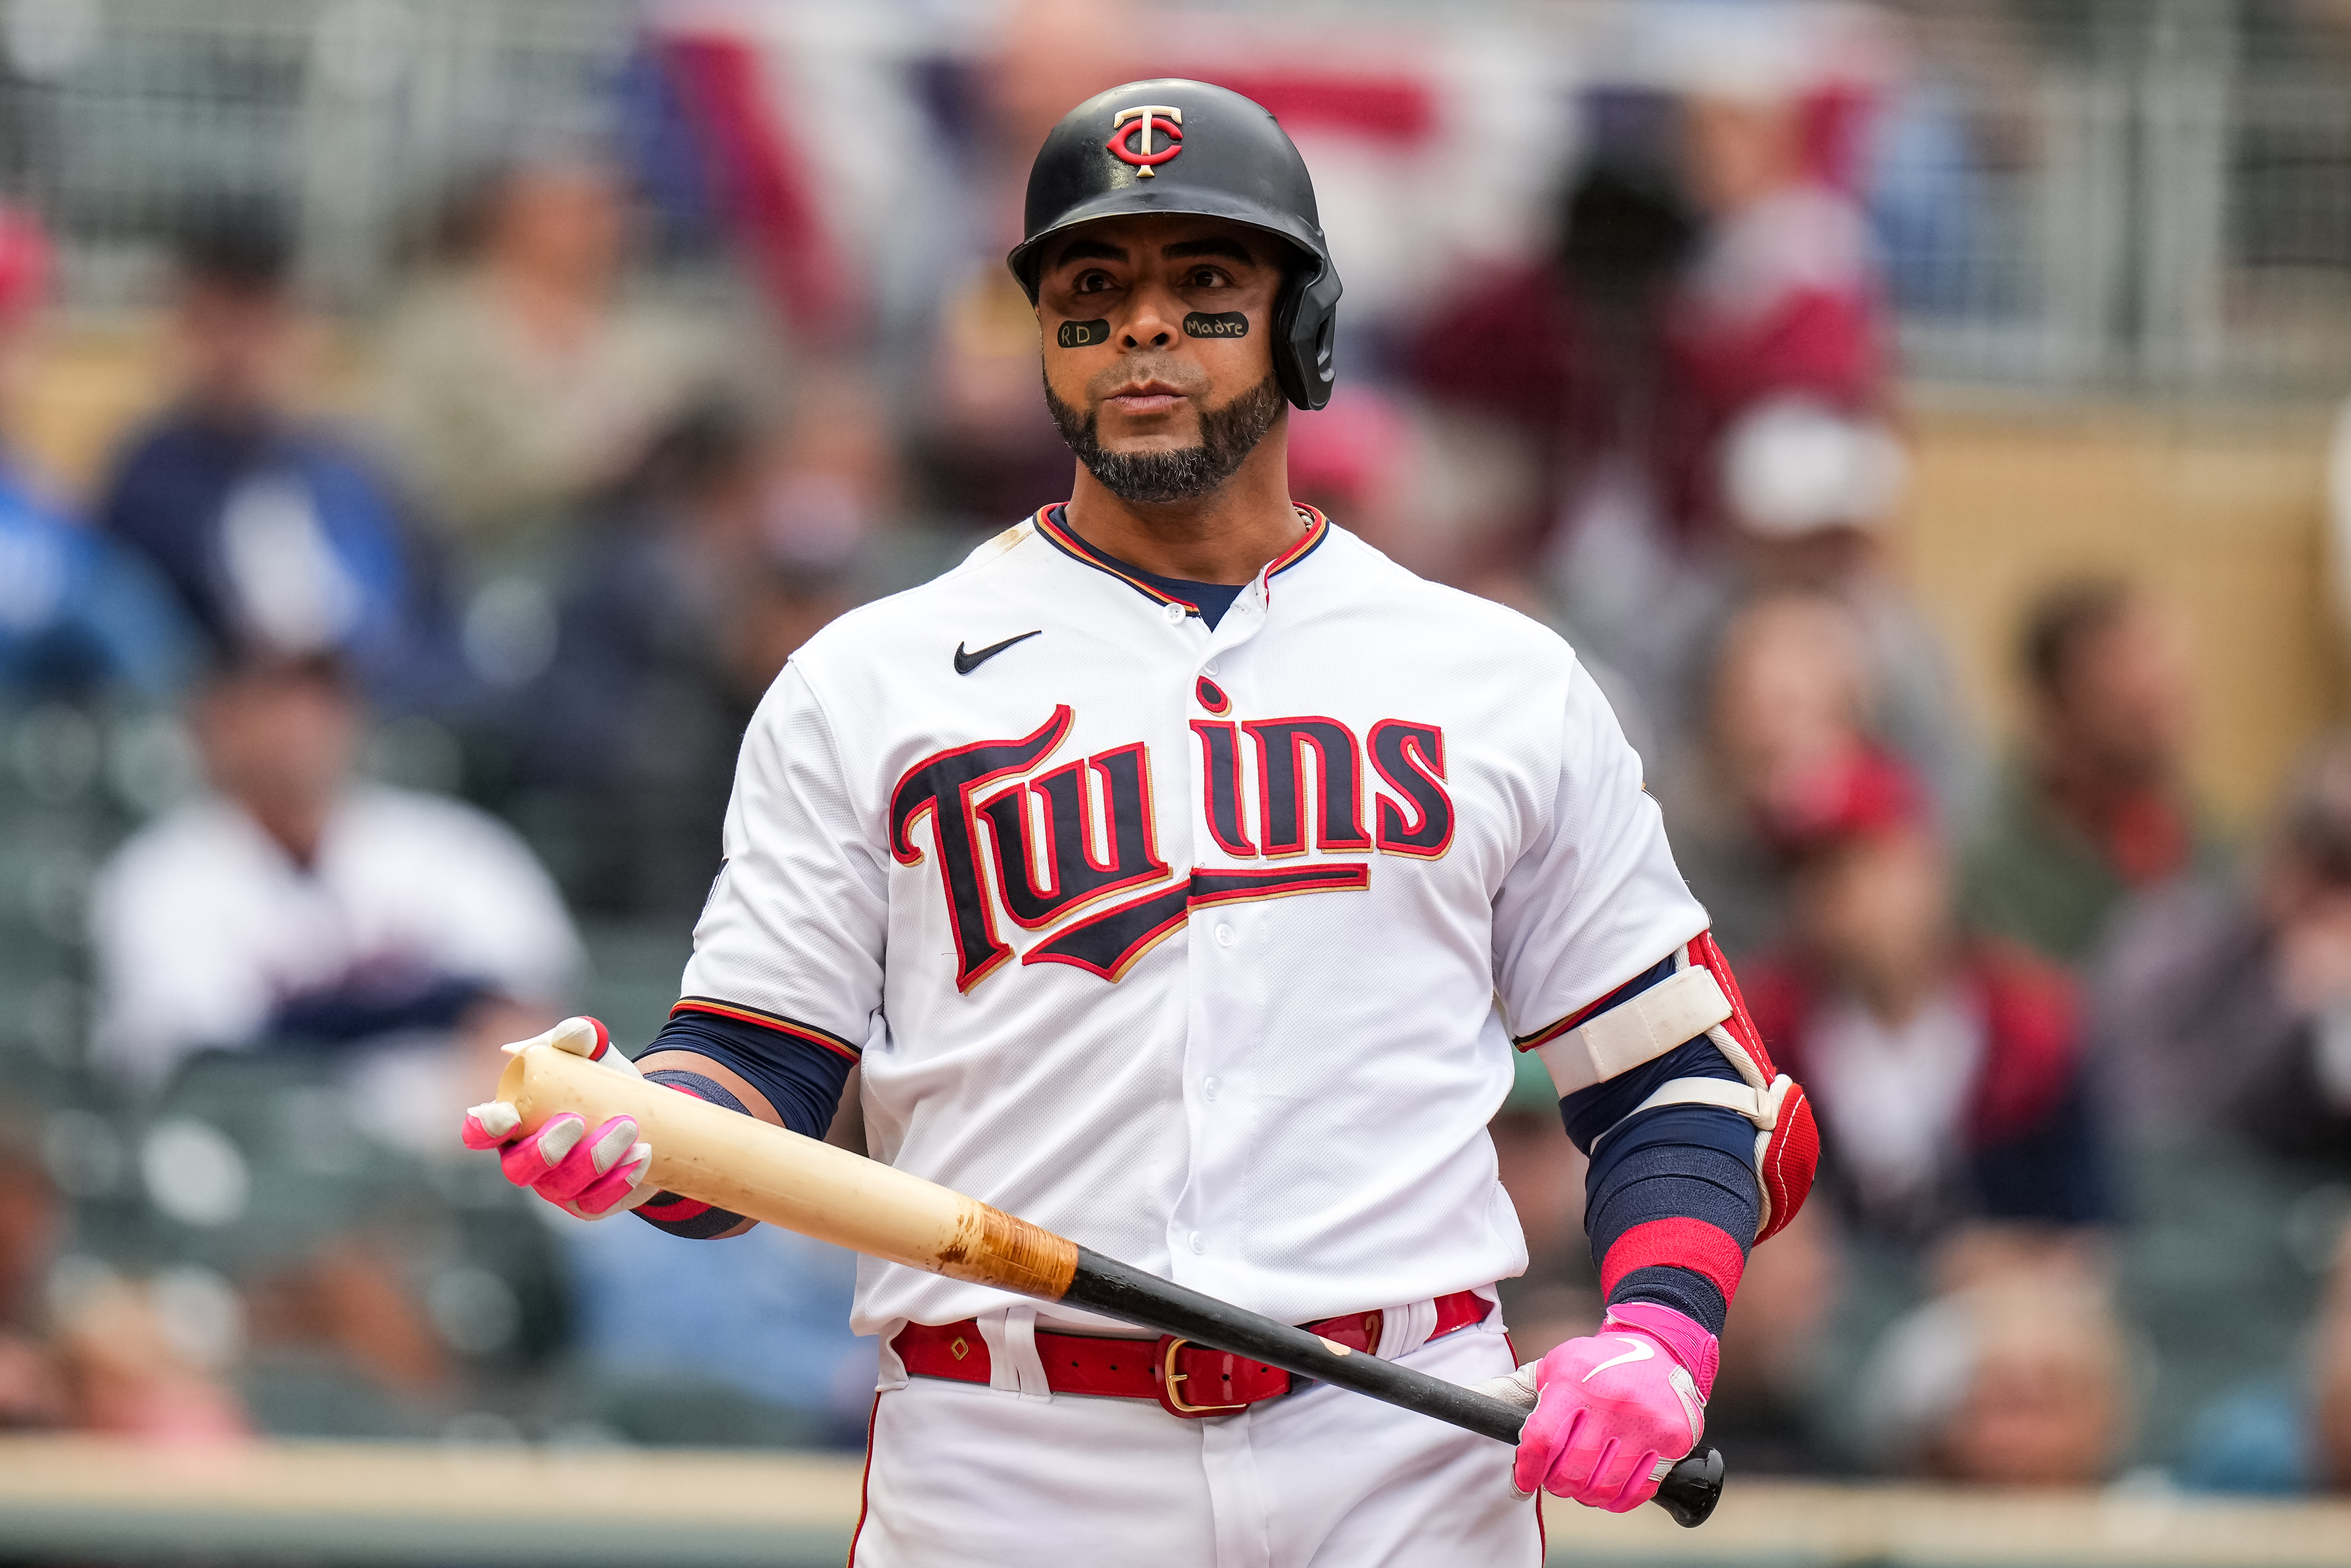 Home run-hitting Nelson Cruz eager to join Twins lineup